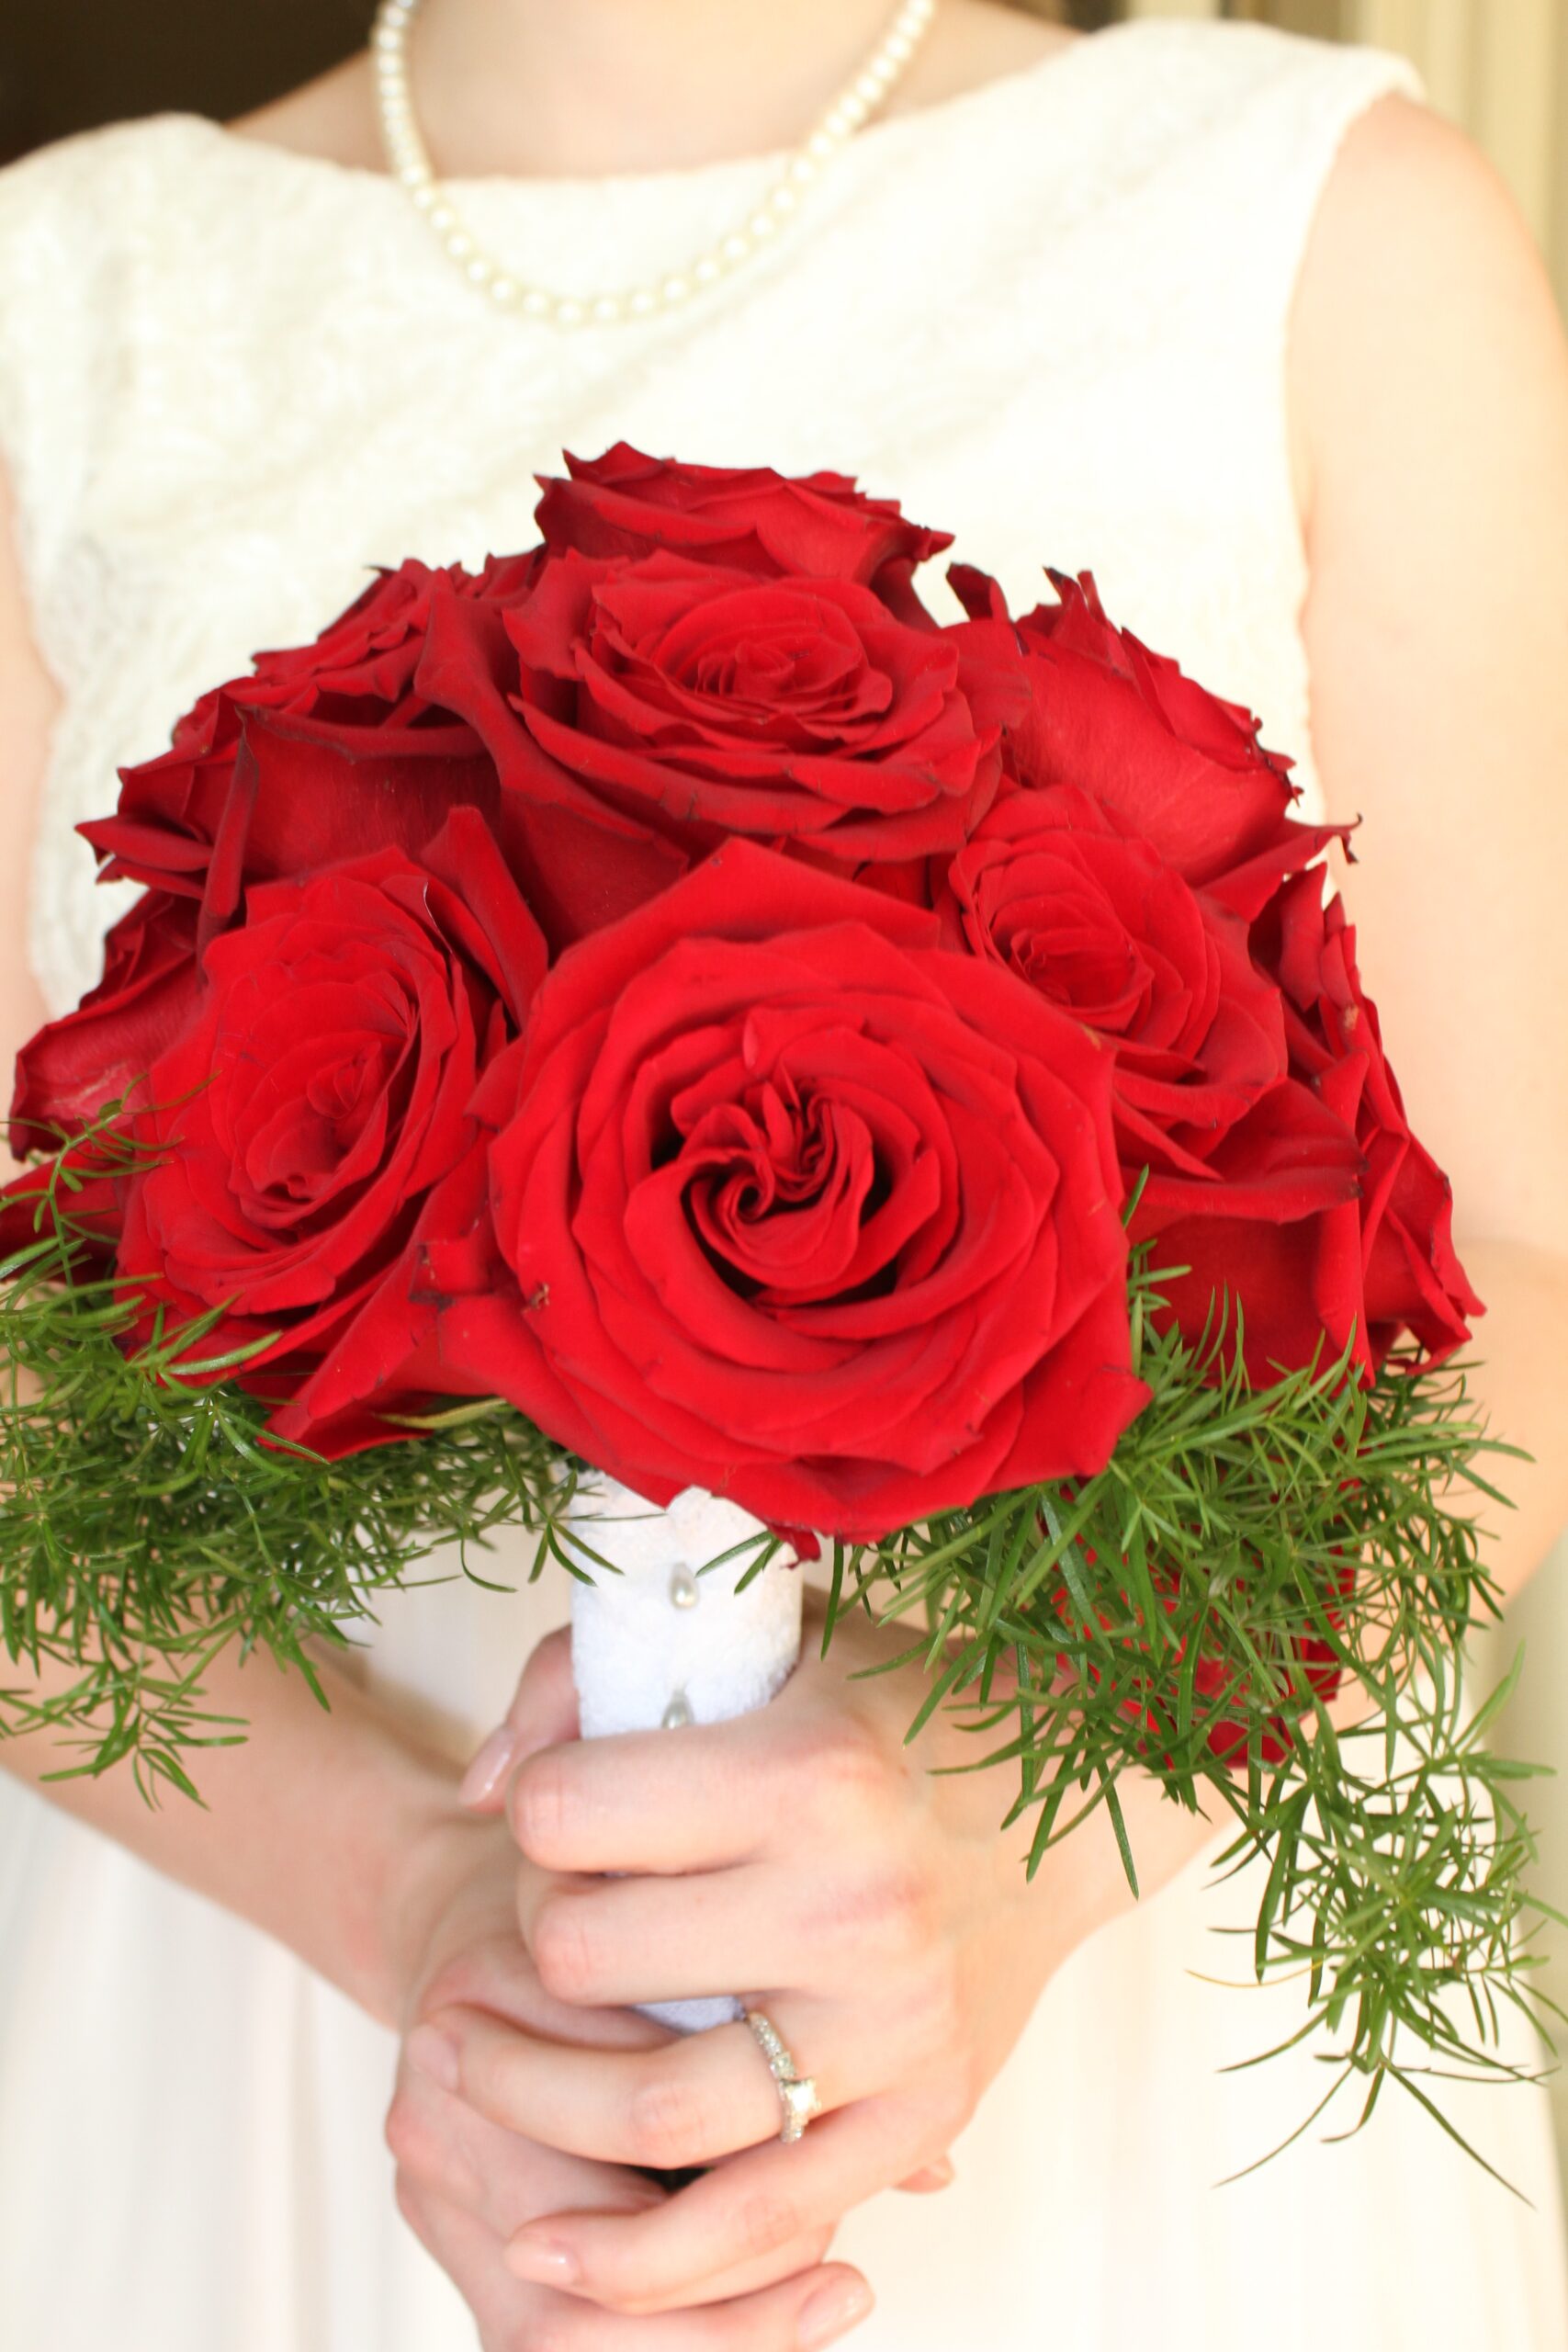 The bride, wearing a white lace sundress holds a large bouquet of red roses. 